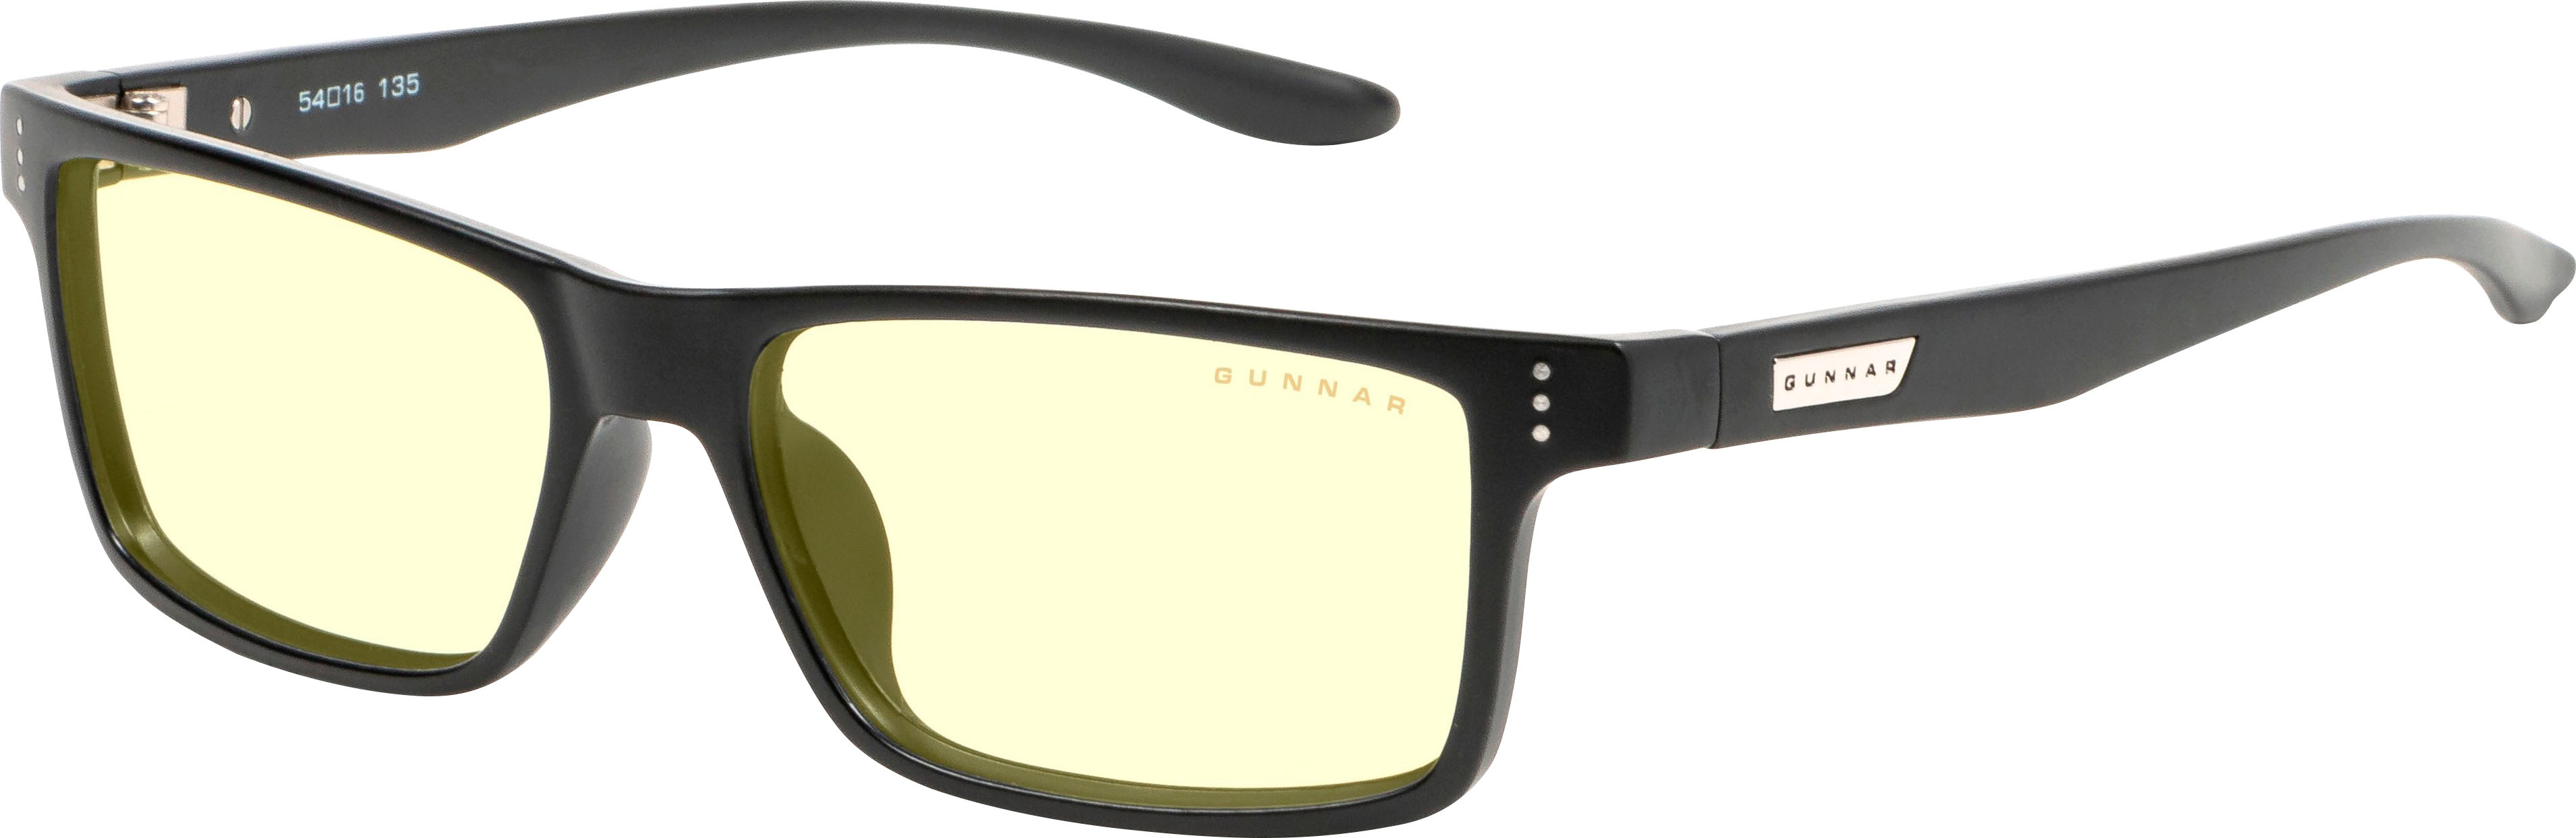 GUNNAR - VERTEX Rectangle Glasses with Ultraviolet (UV) Light Protection, Amber Lenses with Blue-light Filtering - Onyx